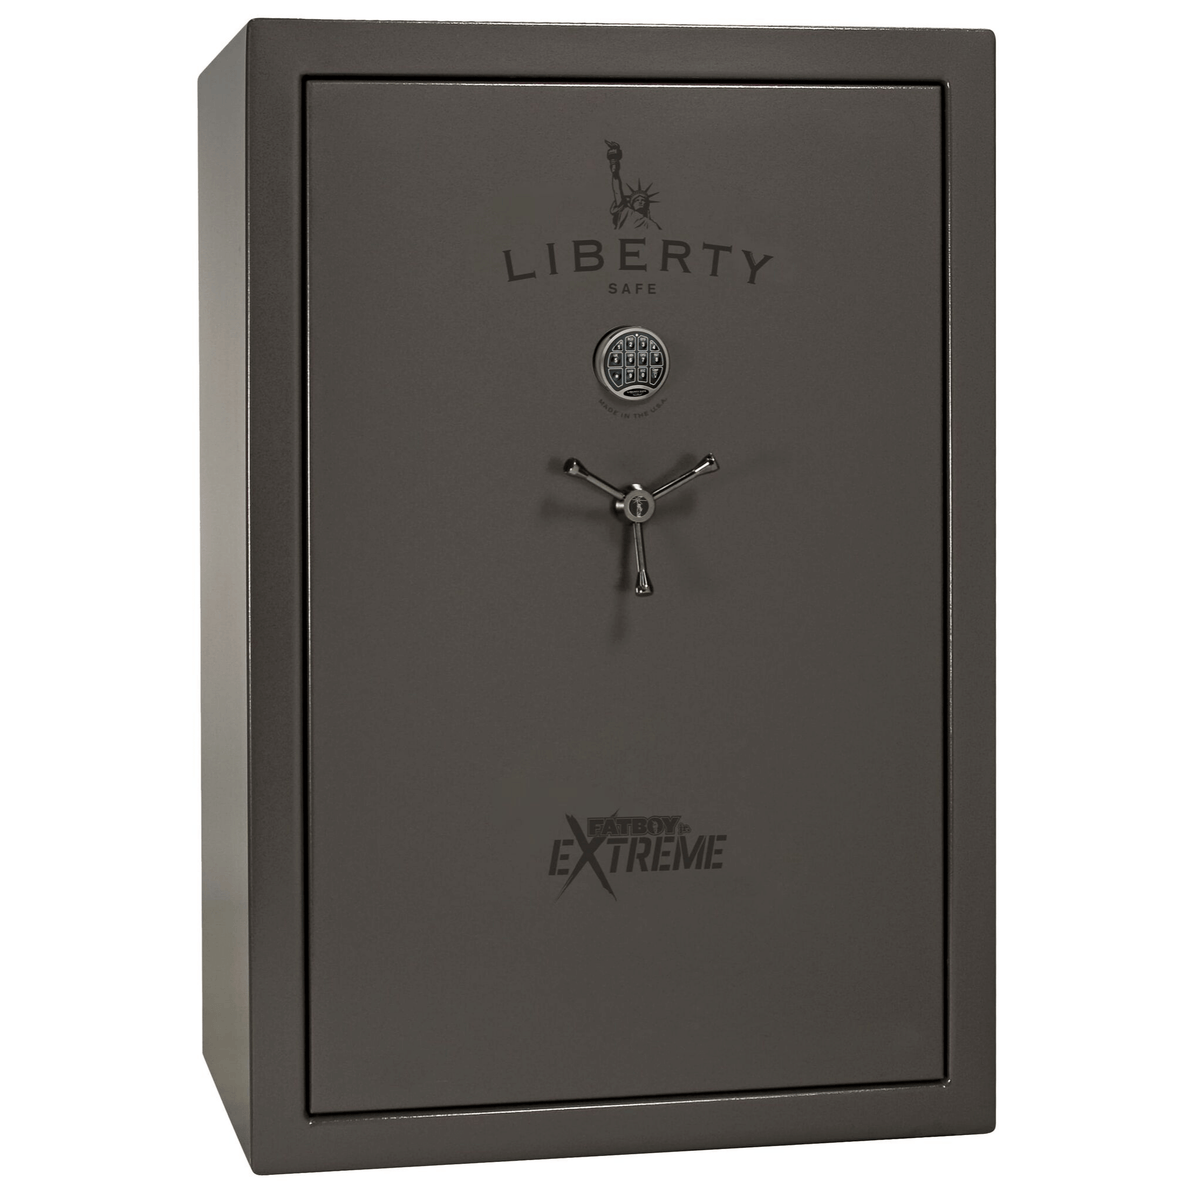 Fatboy Jr. Extreme | Gray Marble | Level 4 Security | 75 Minute Fire Protection | $250 Factory Mail In Rebate